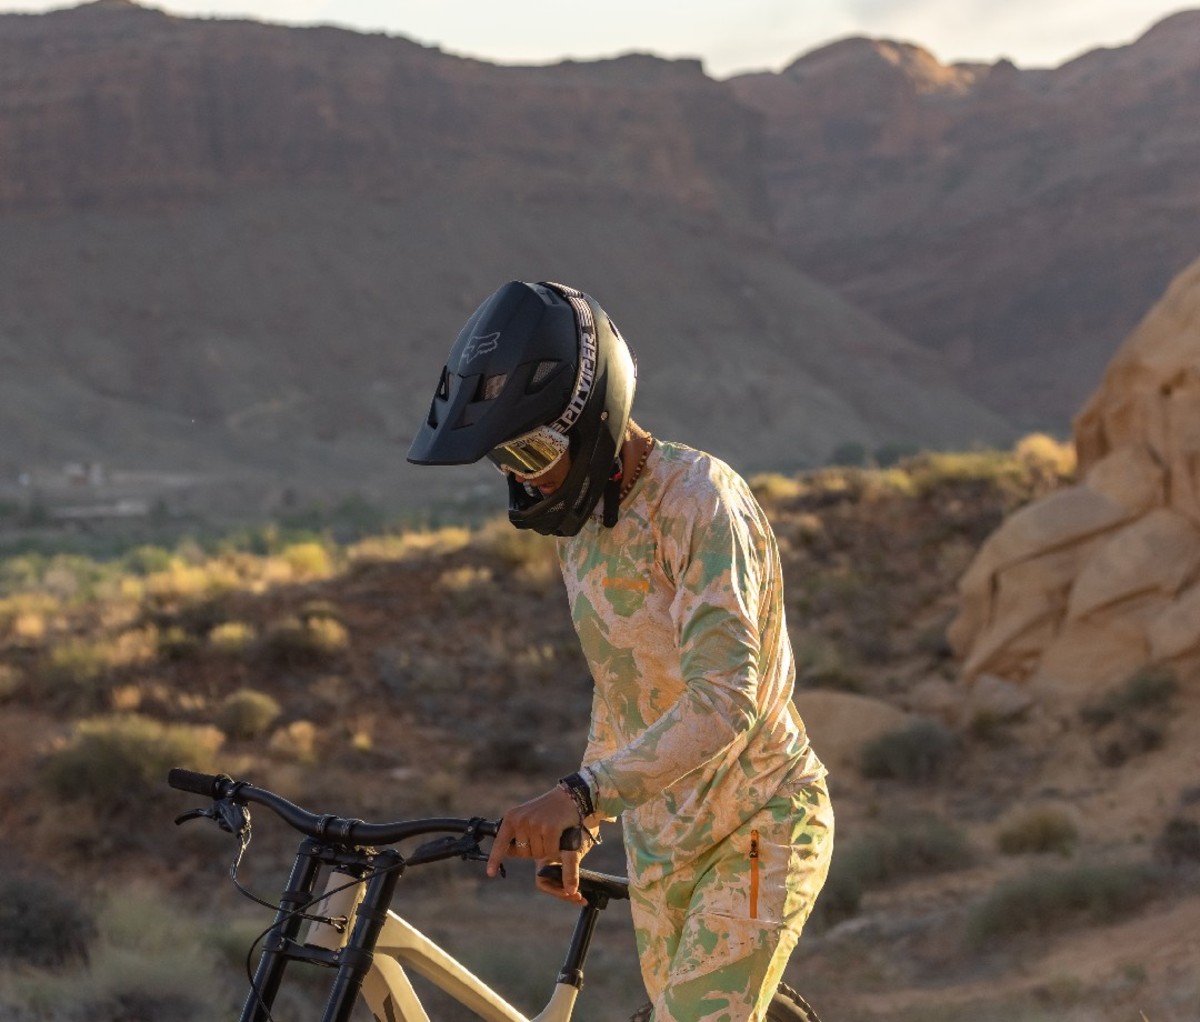 Pit Viper’s new LXIX MTB jerseys are made of UPF+50 fabric for sun protection.